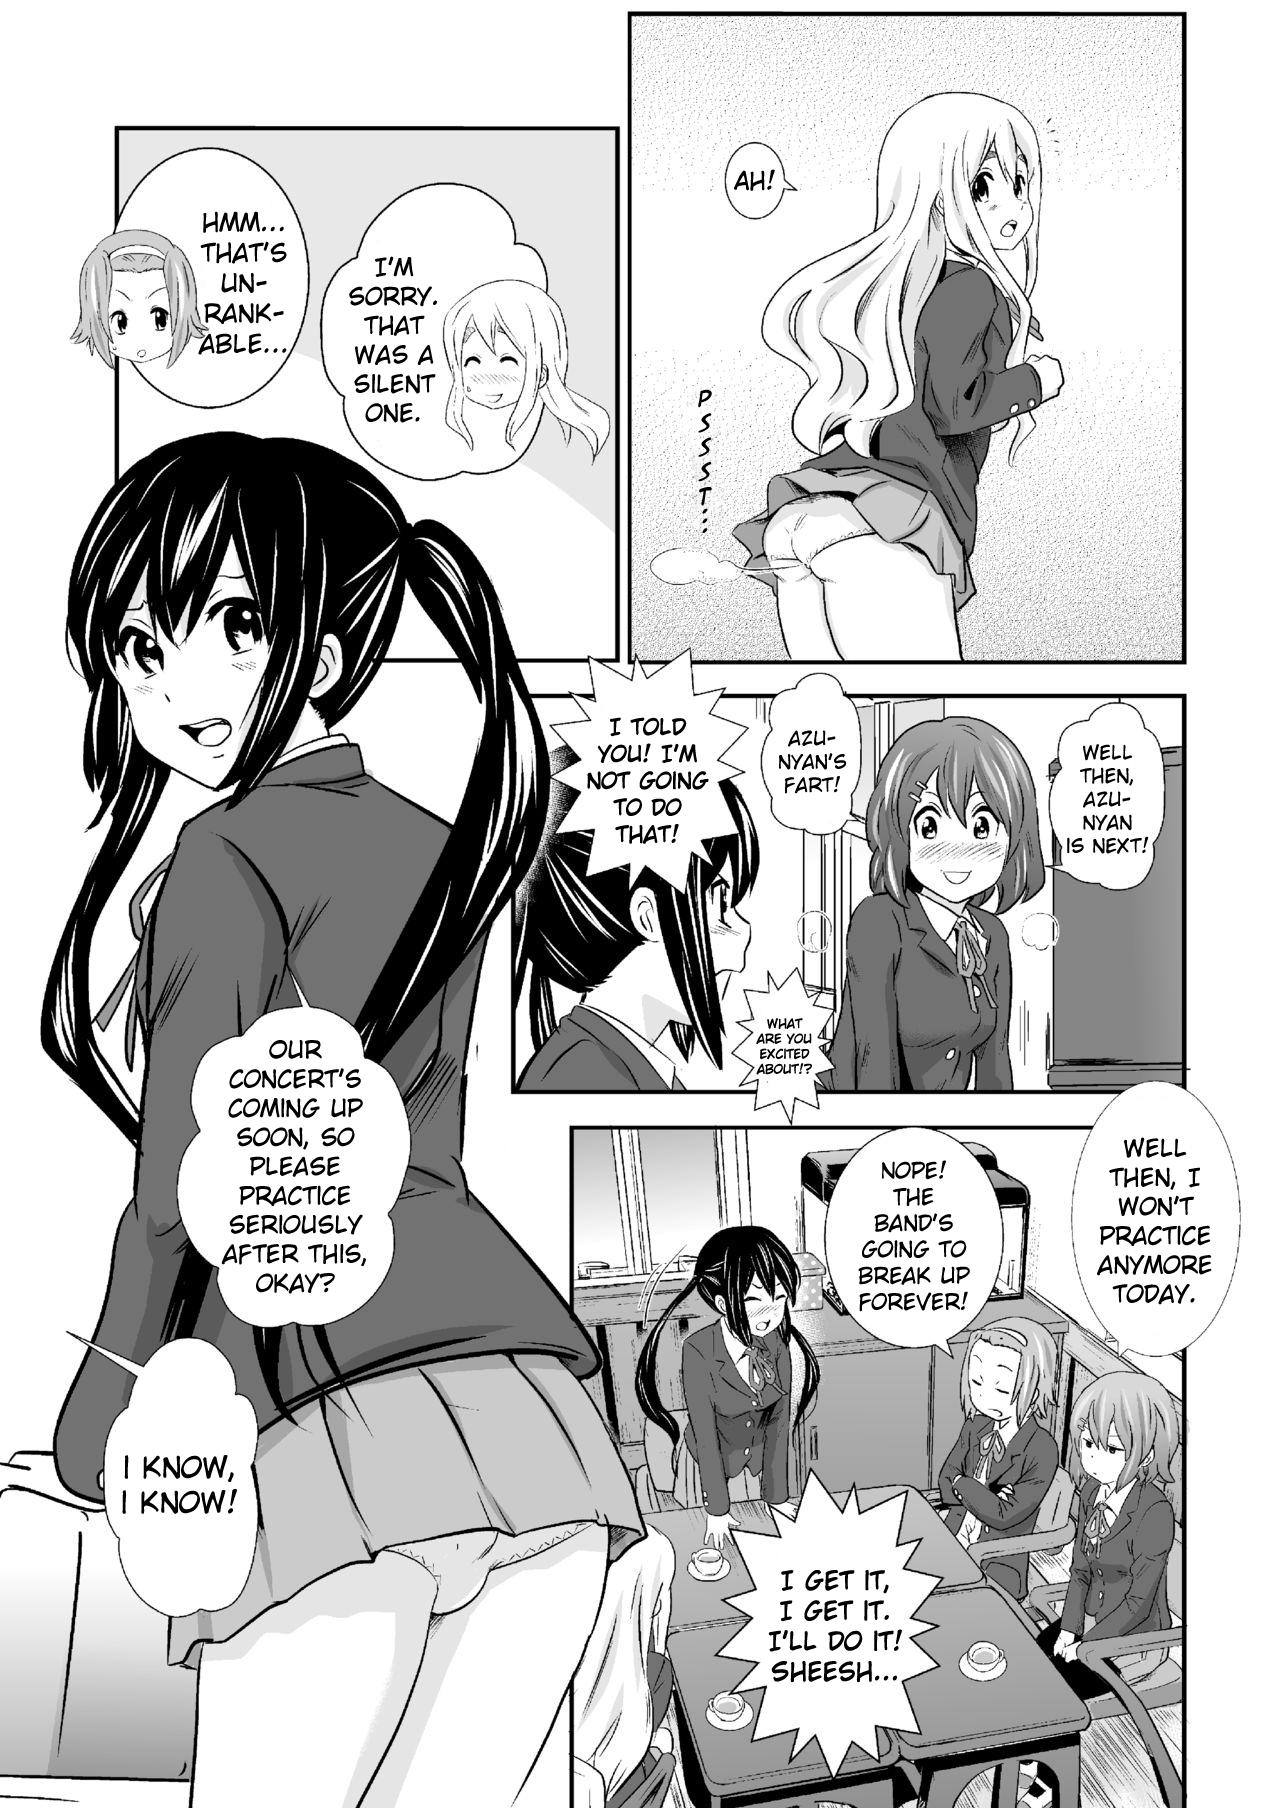 Jerking Houkago Onara Time | After School Fart Time - K on Putaria - Page 4